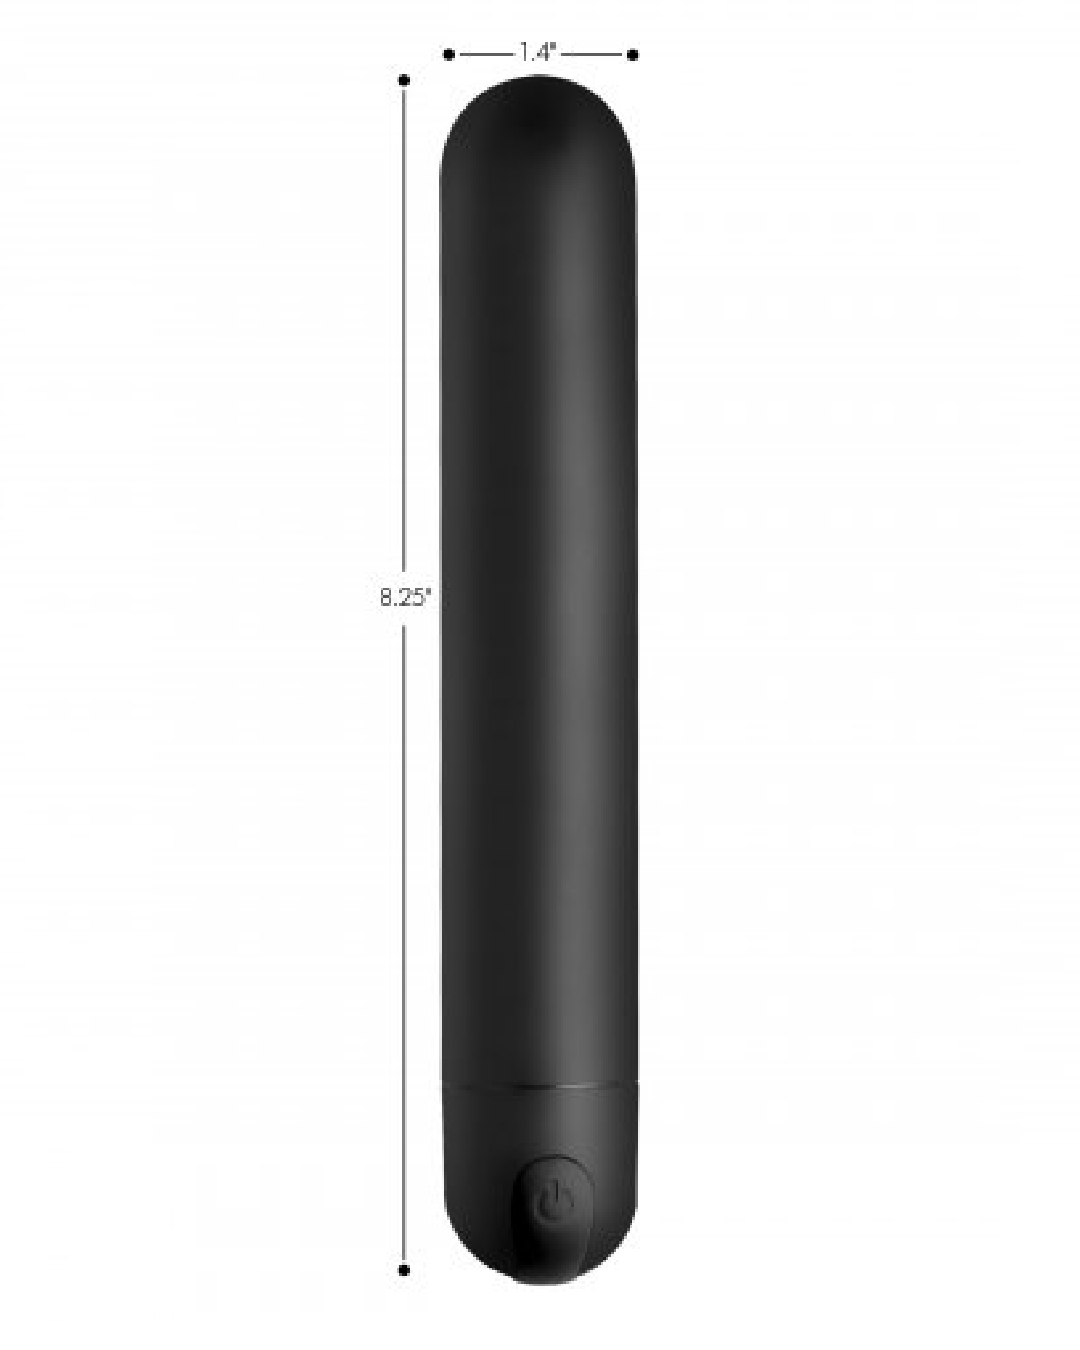 Bang! XL 3 Speed Rechargeable Bullet Vibrator - black on white background